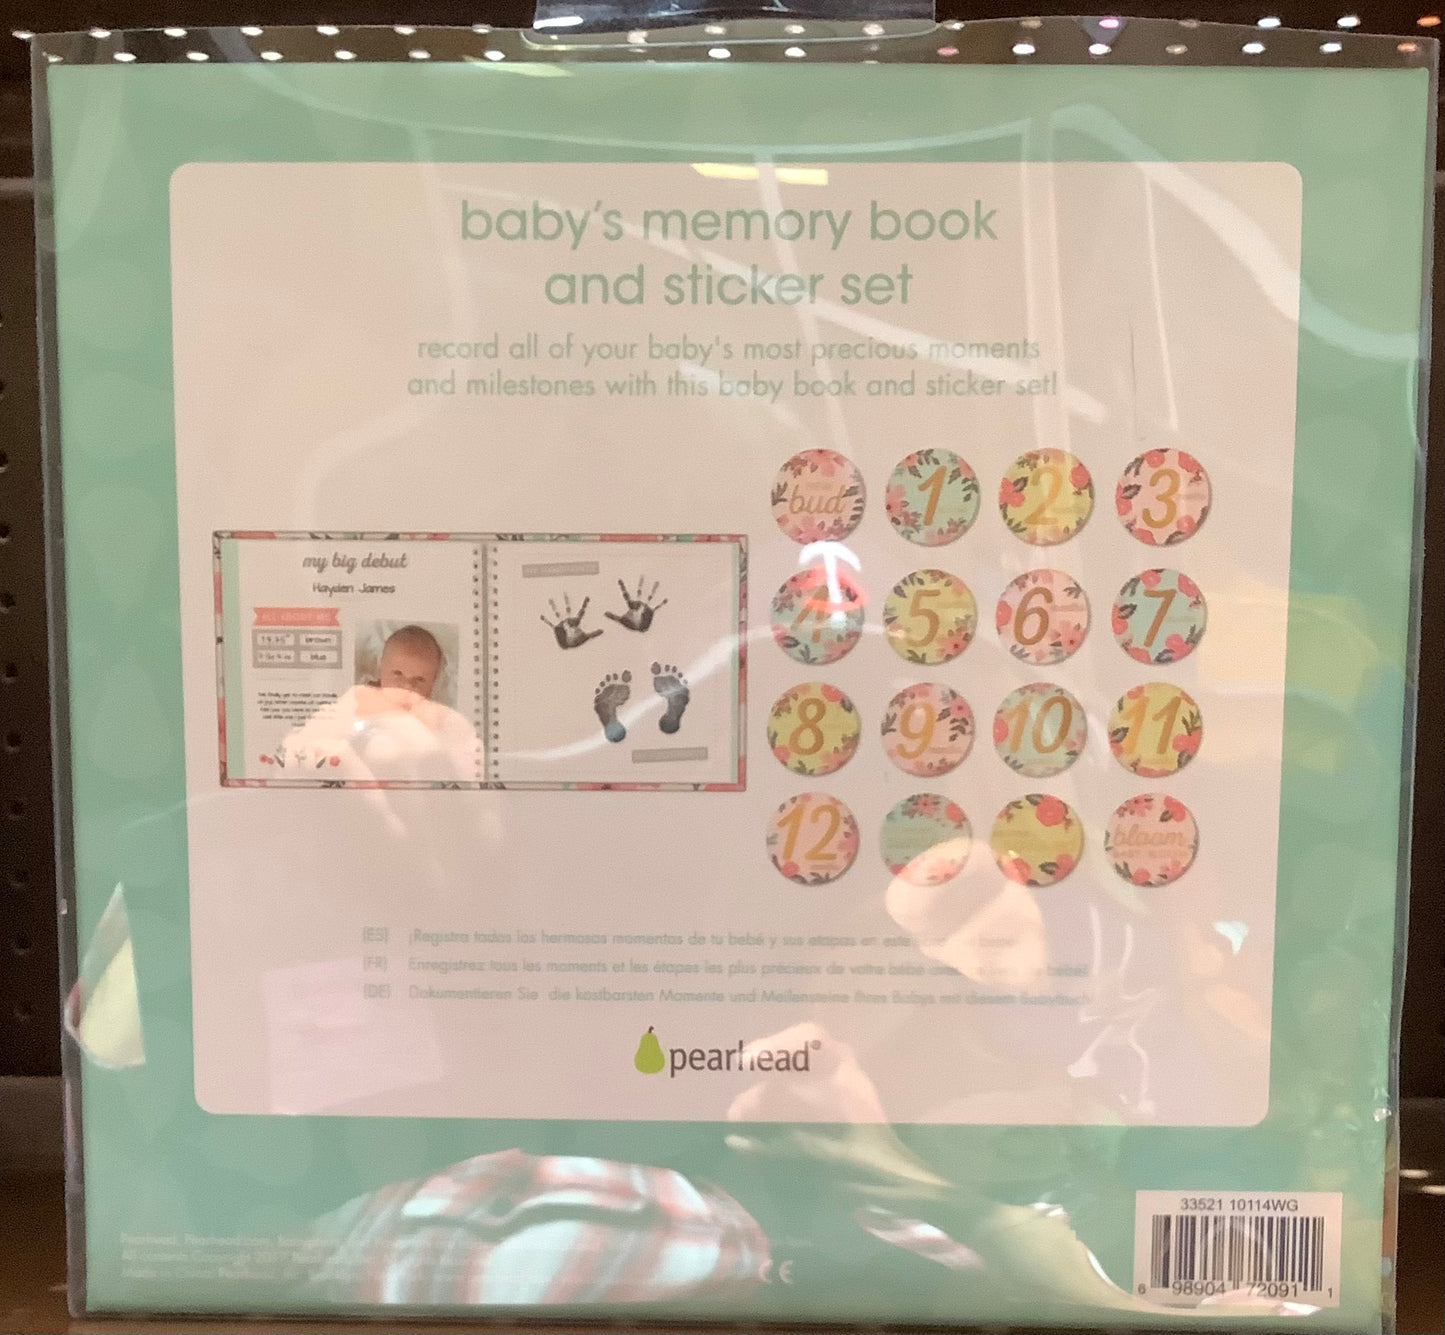 Pearhead Baby Memory Book and Baby Belly Sticker Set
Floral Photo and Scrapbook Albums